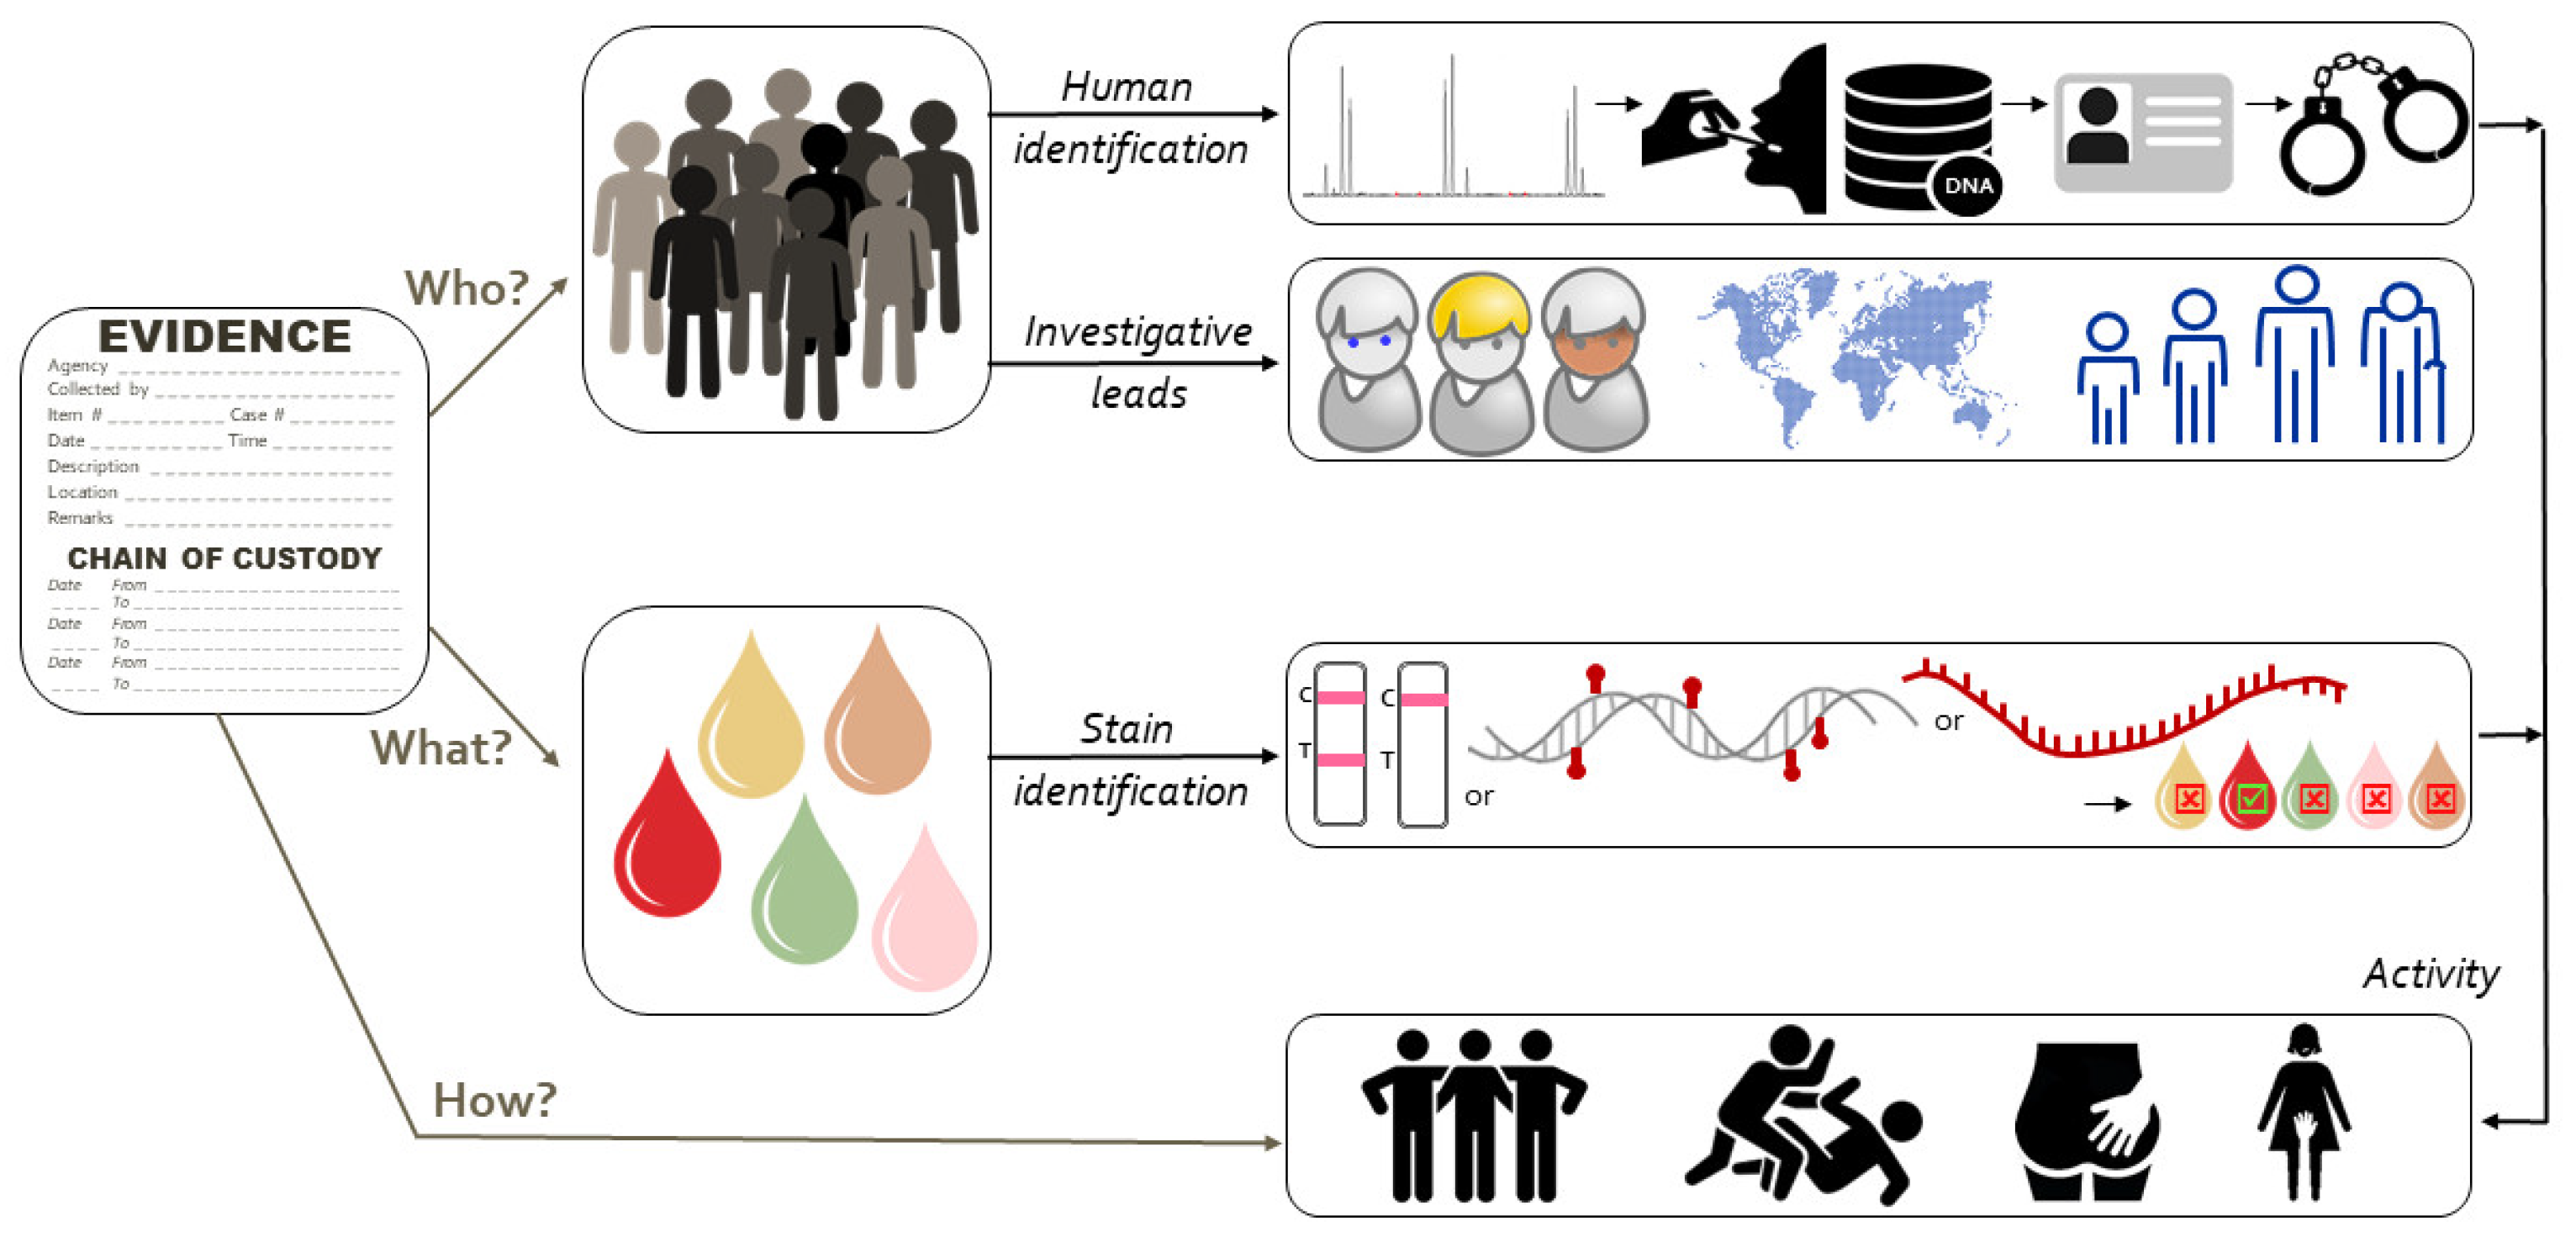 Genes | Free Full-Text | On the Identification of Body Fluids and Tissues:  A Crucial Link in the Investigation and Solution of Crime